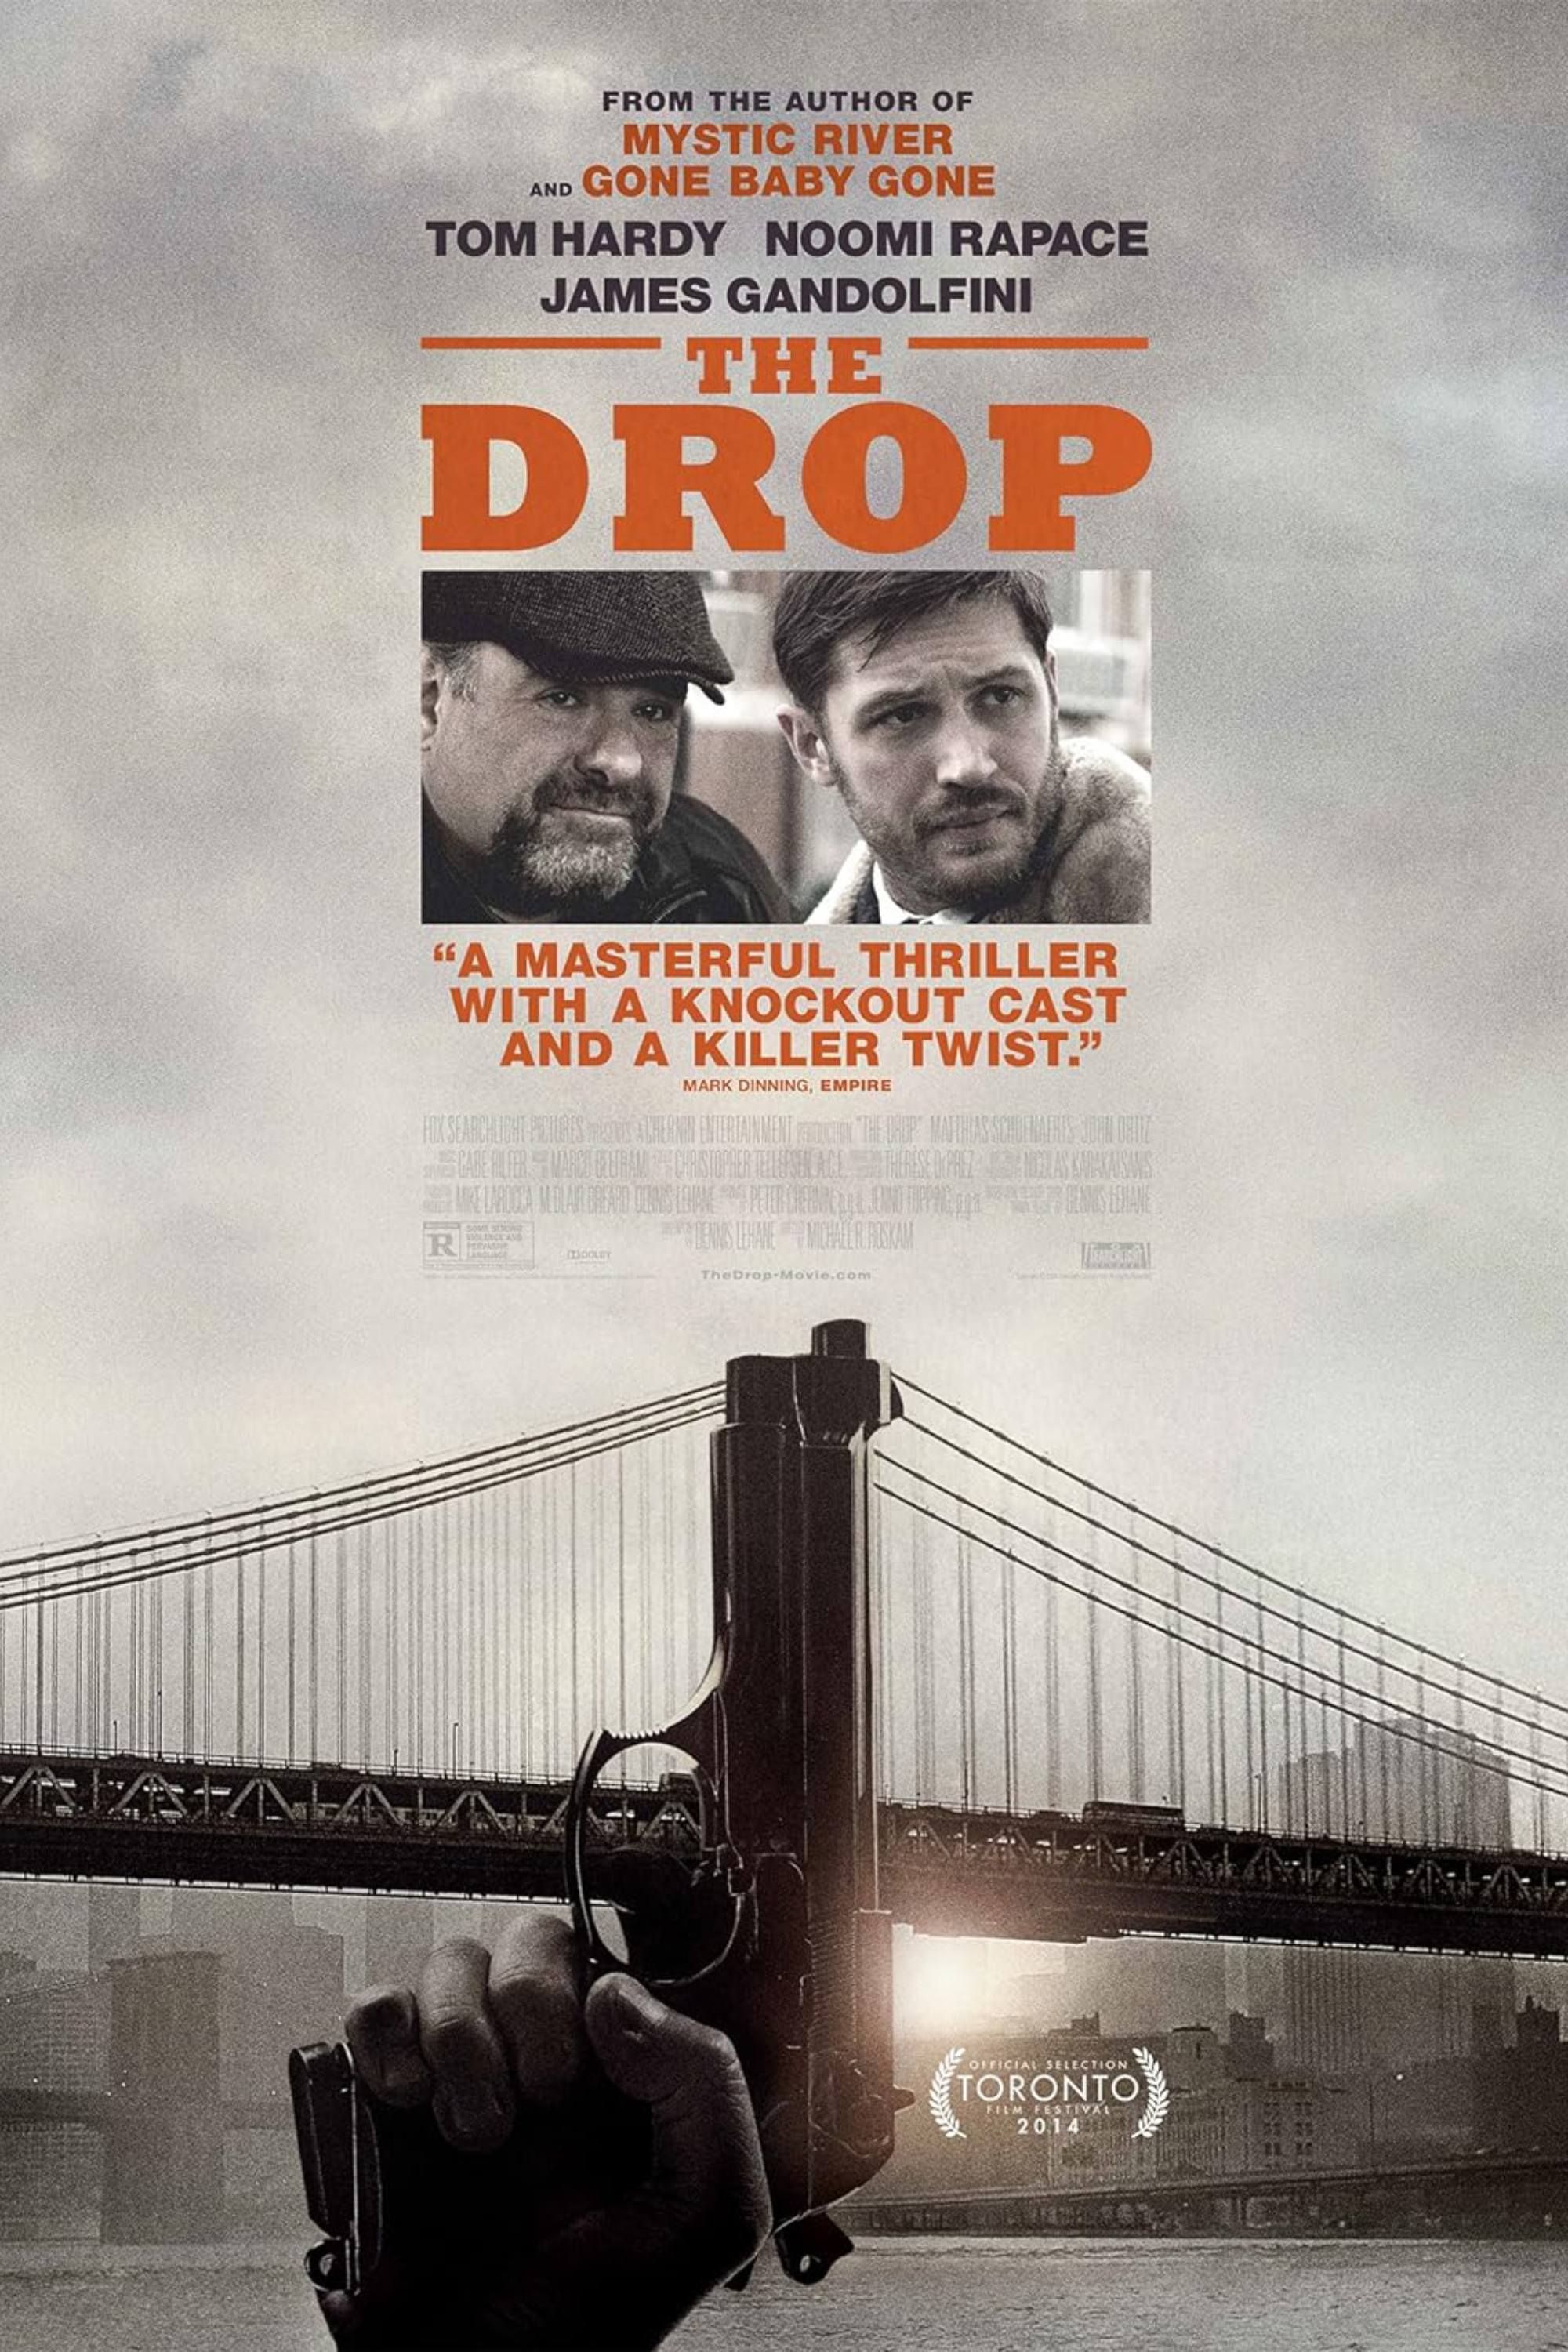 The Drop (2014) - Poster - Tom Hardy & Noomi Rapace